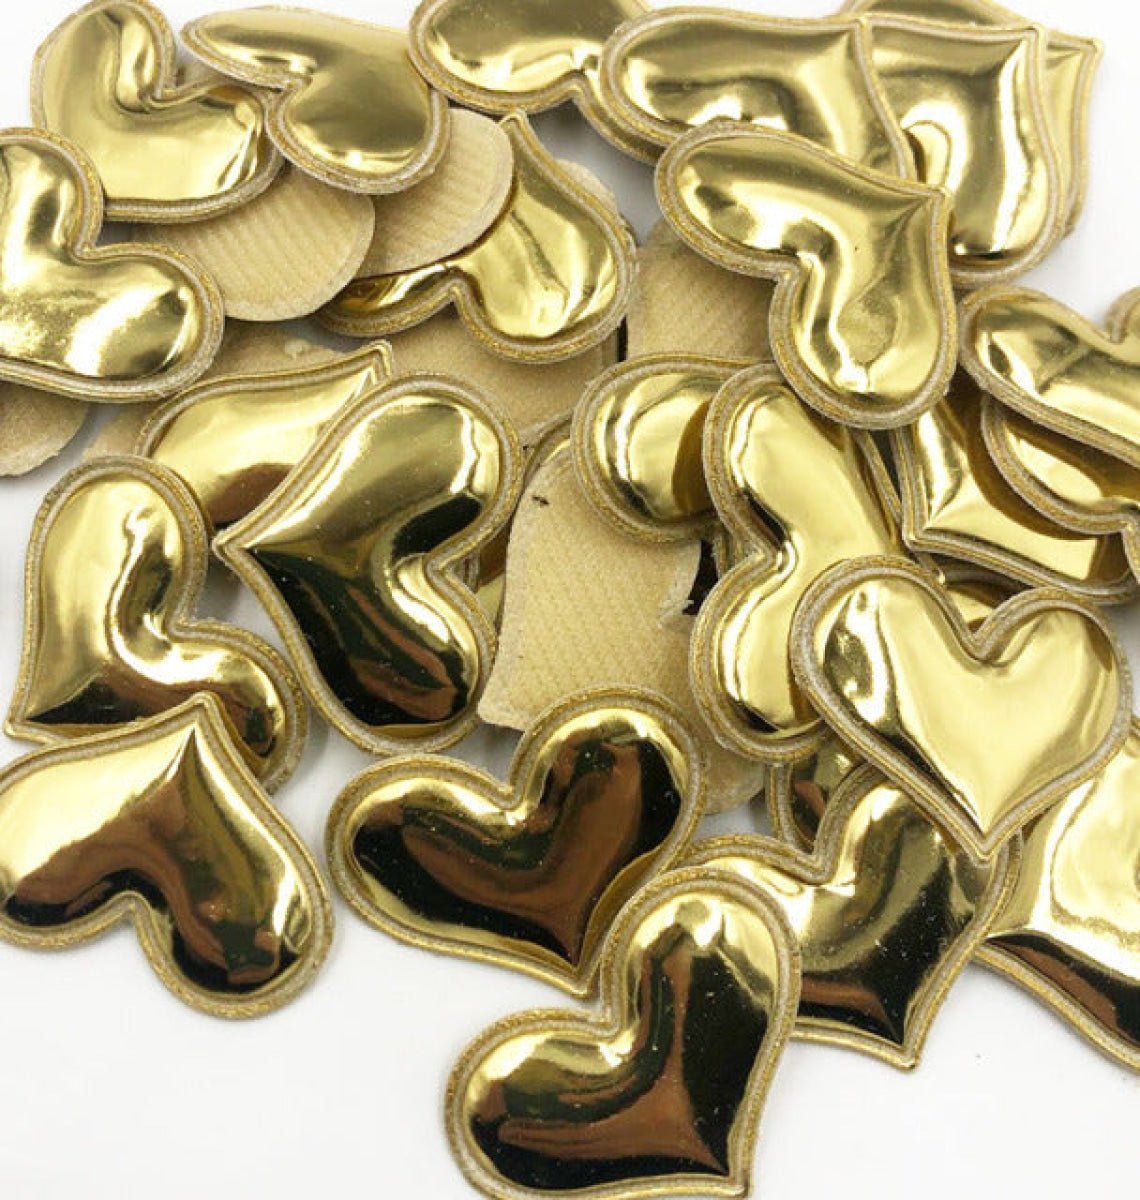 100pcs Glossy Shiny Padded Patches Heart Shape Garment Appliques For Decoration DIY Accessories Toy Craft Clothing PU Leather - Gold - - Asia Sell